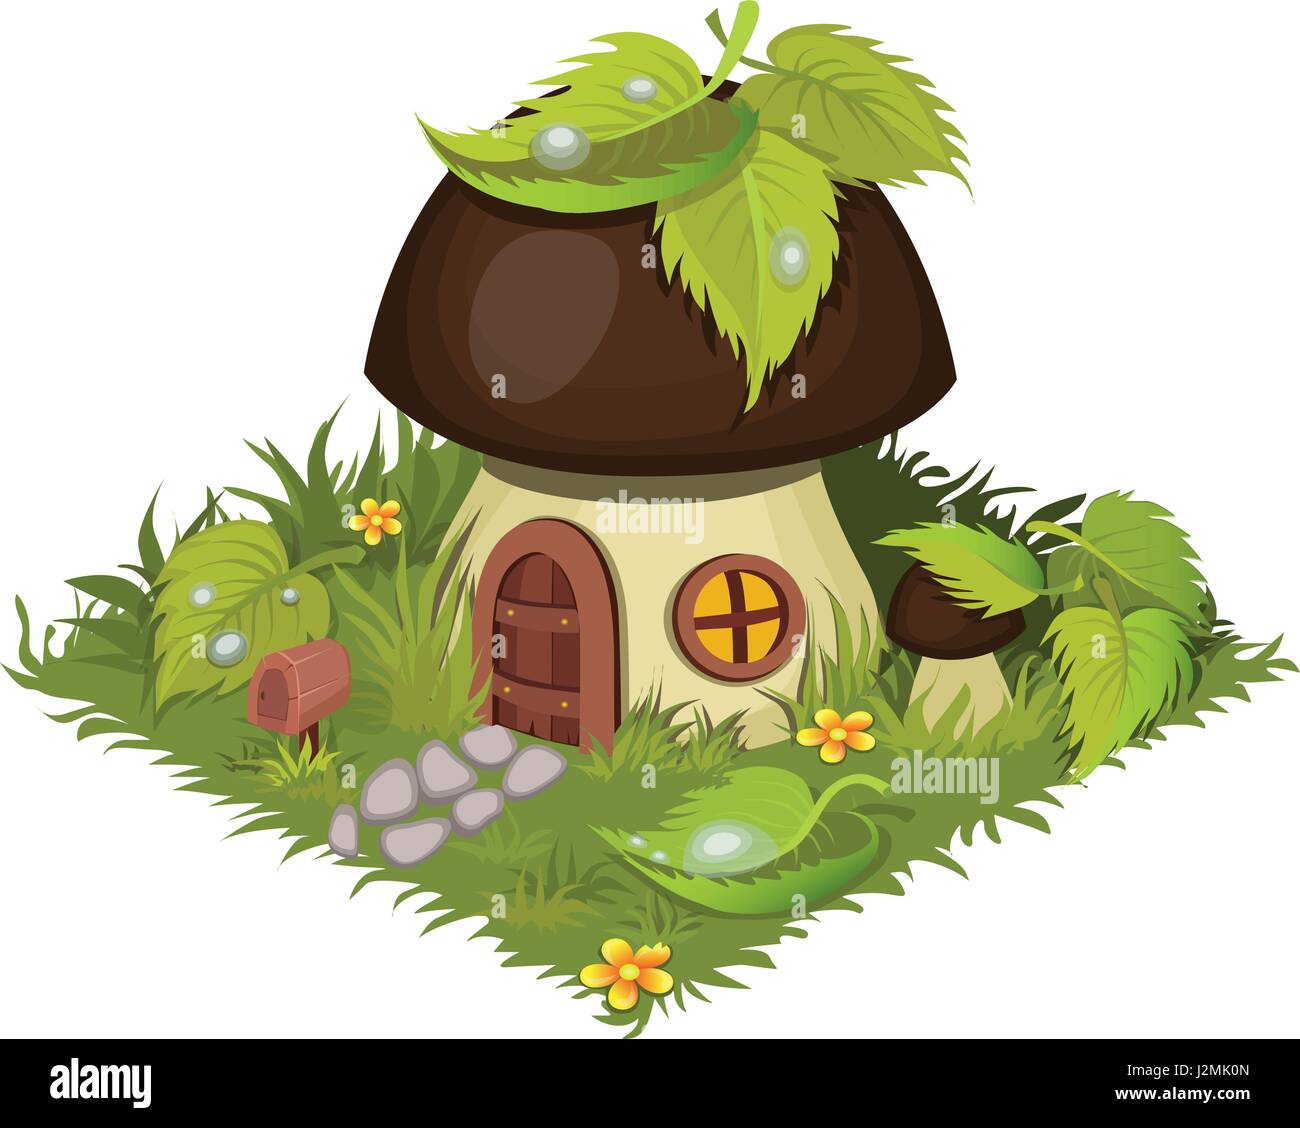 Isometric Cartoon Fantasy Mushroom Village House Decorated with Leaves - Elements for Tileset Map Stock Vector